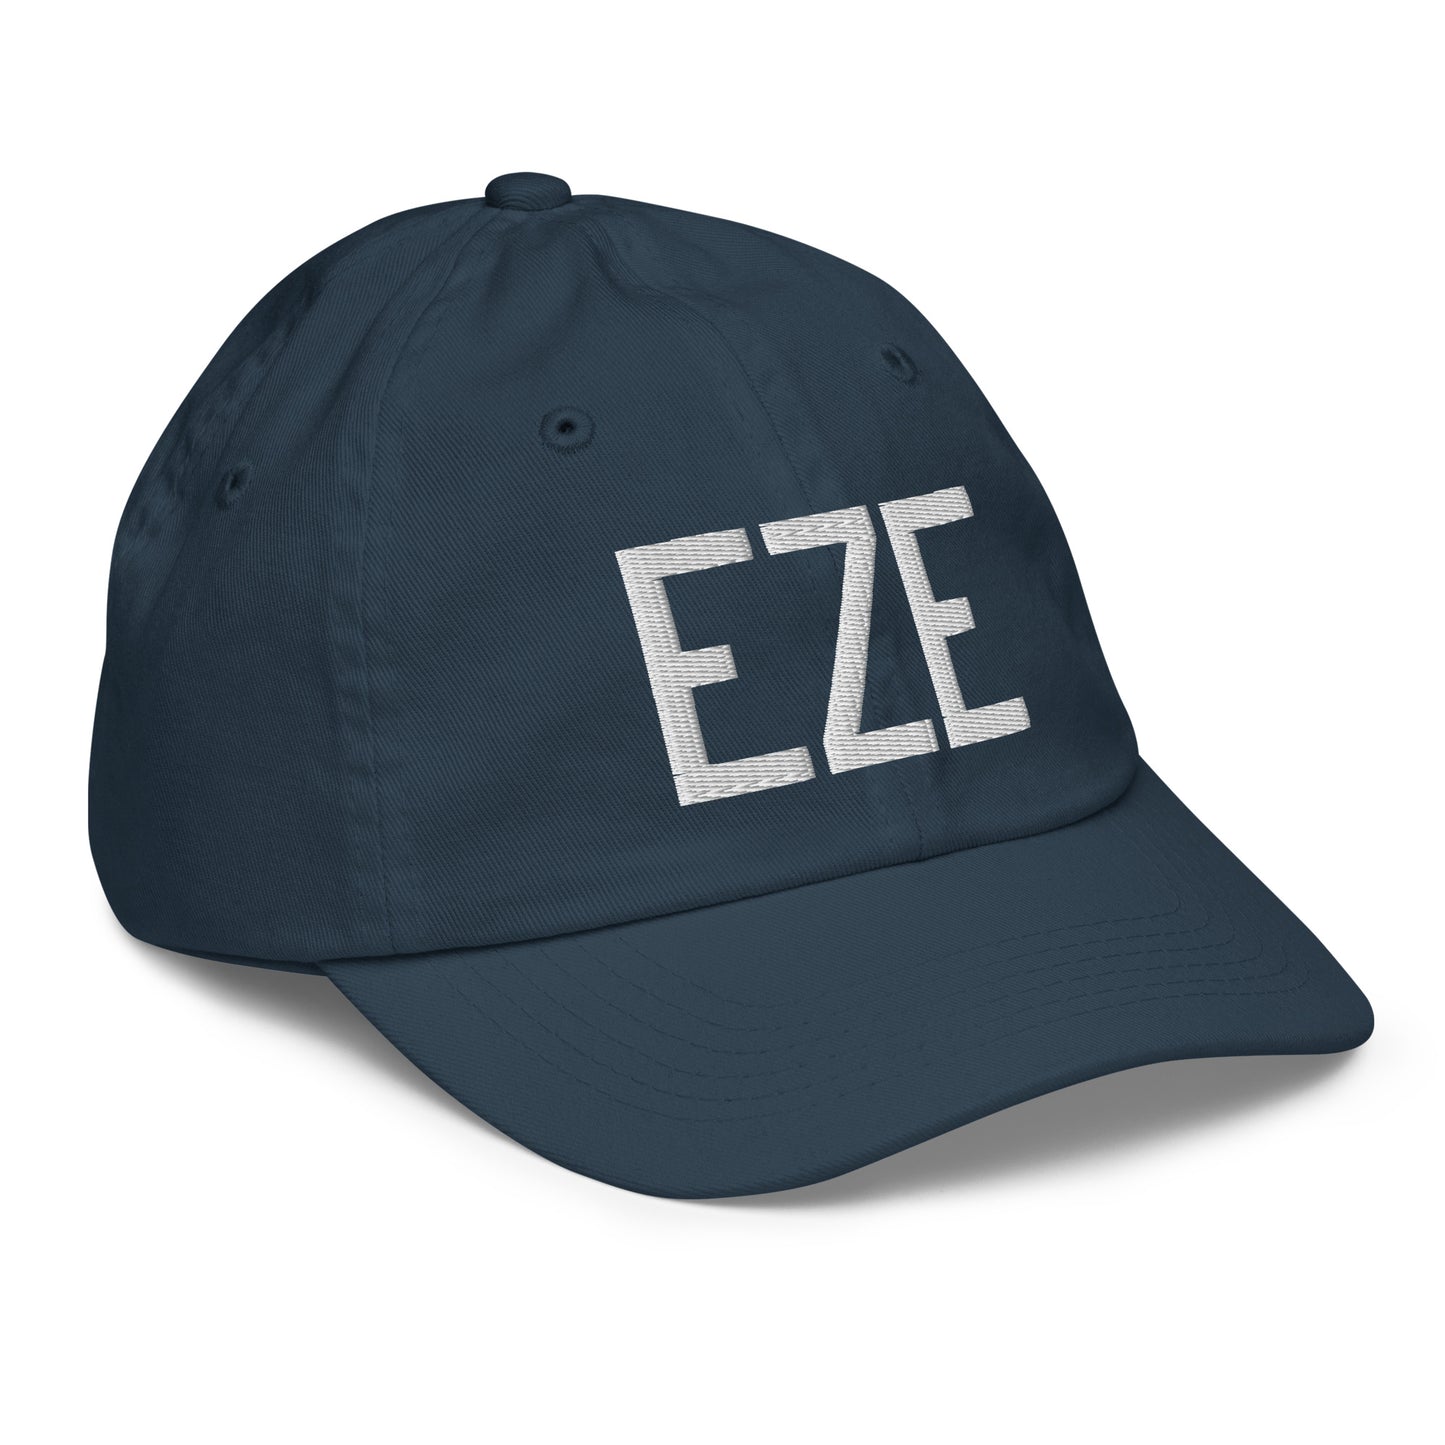 Airport Code Kid's Baseball Cap - White • EZE Buenos Aires • YHM Designs - Image 15